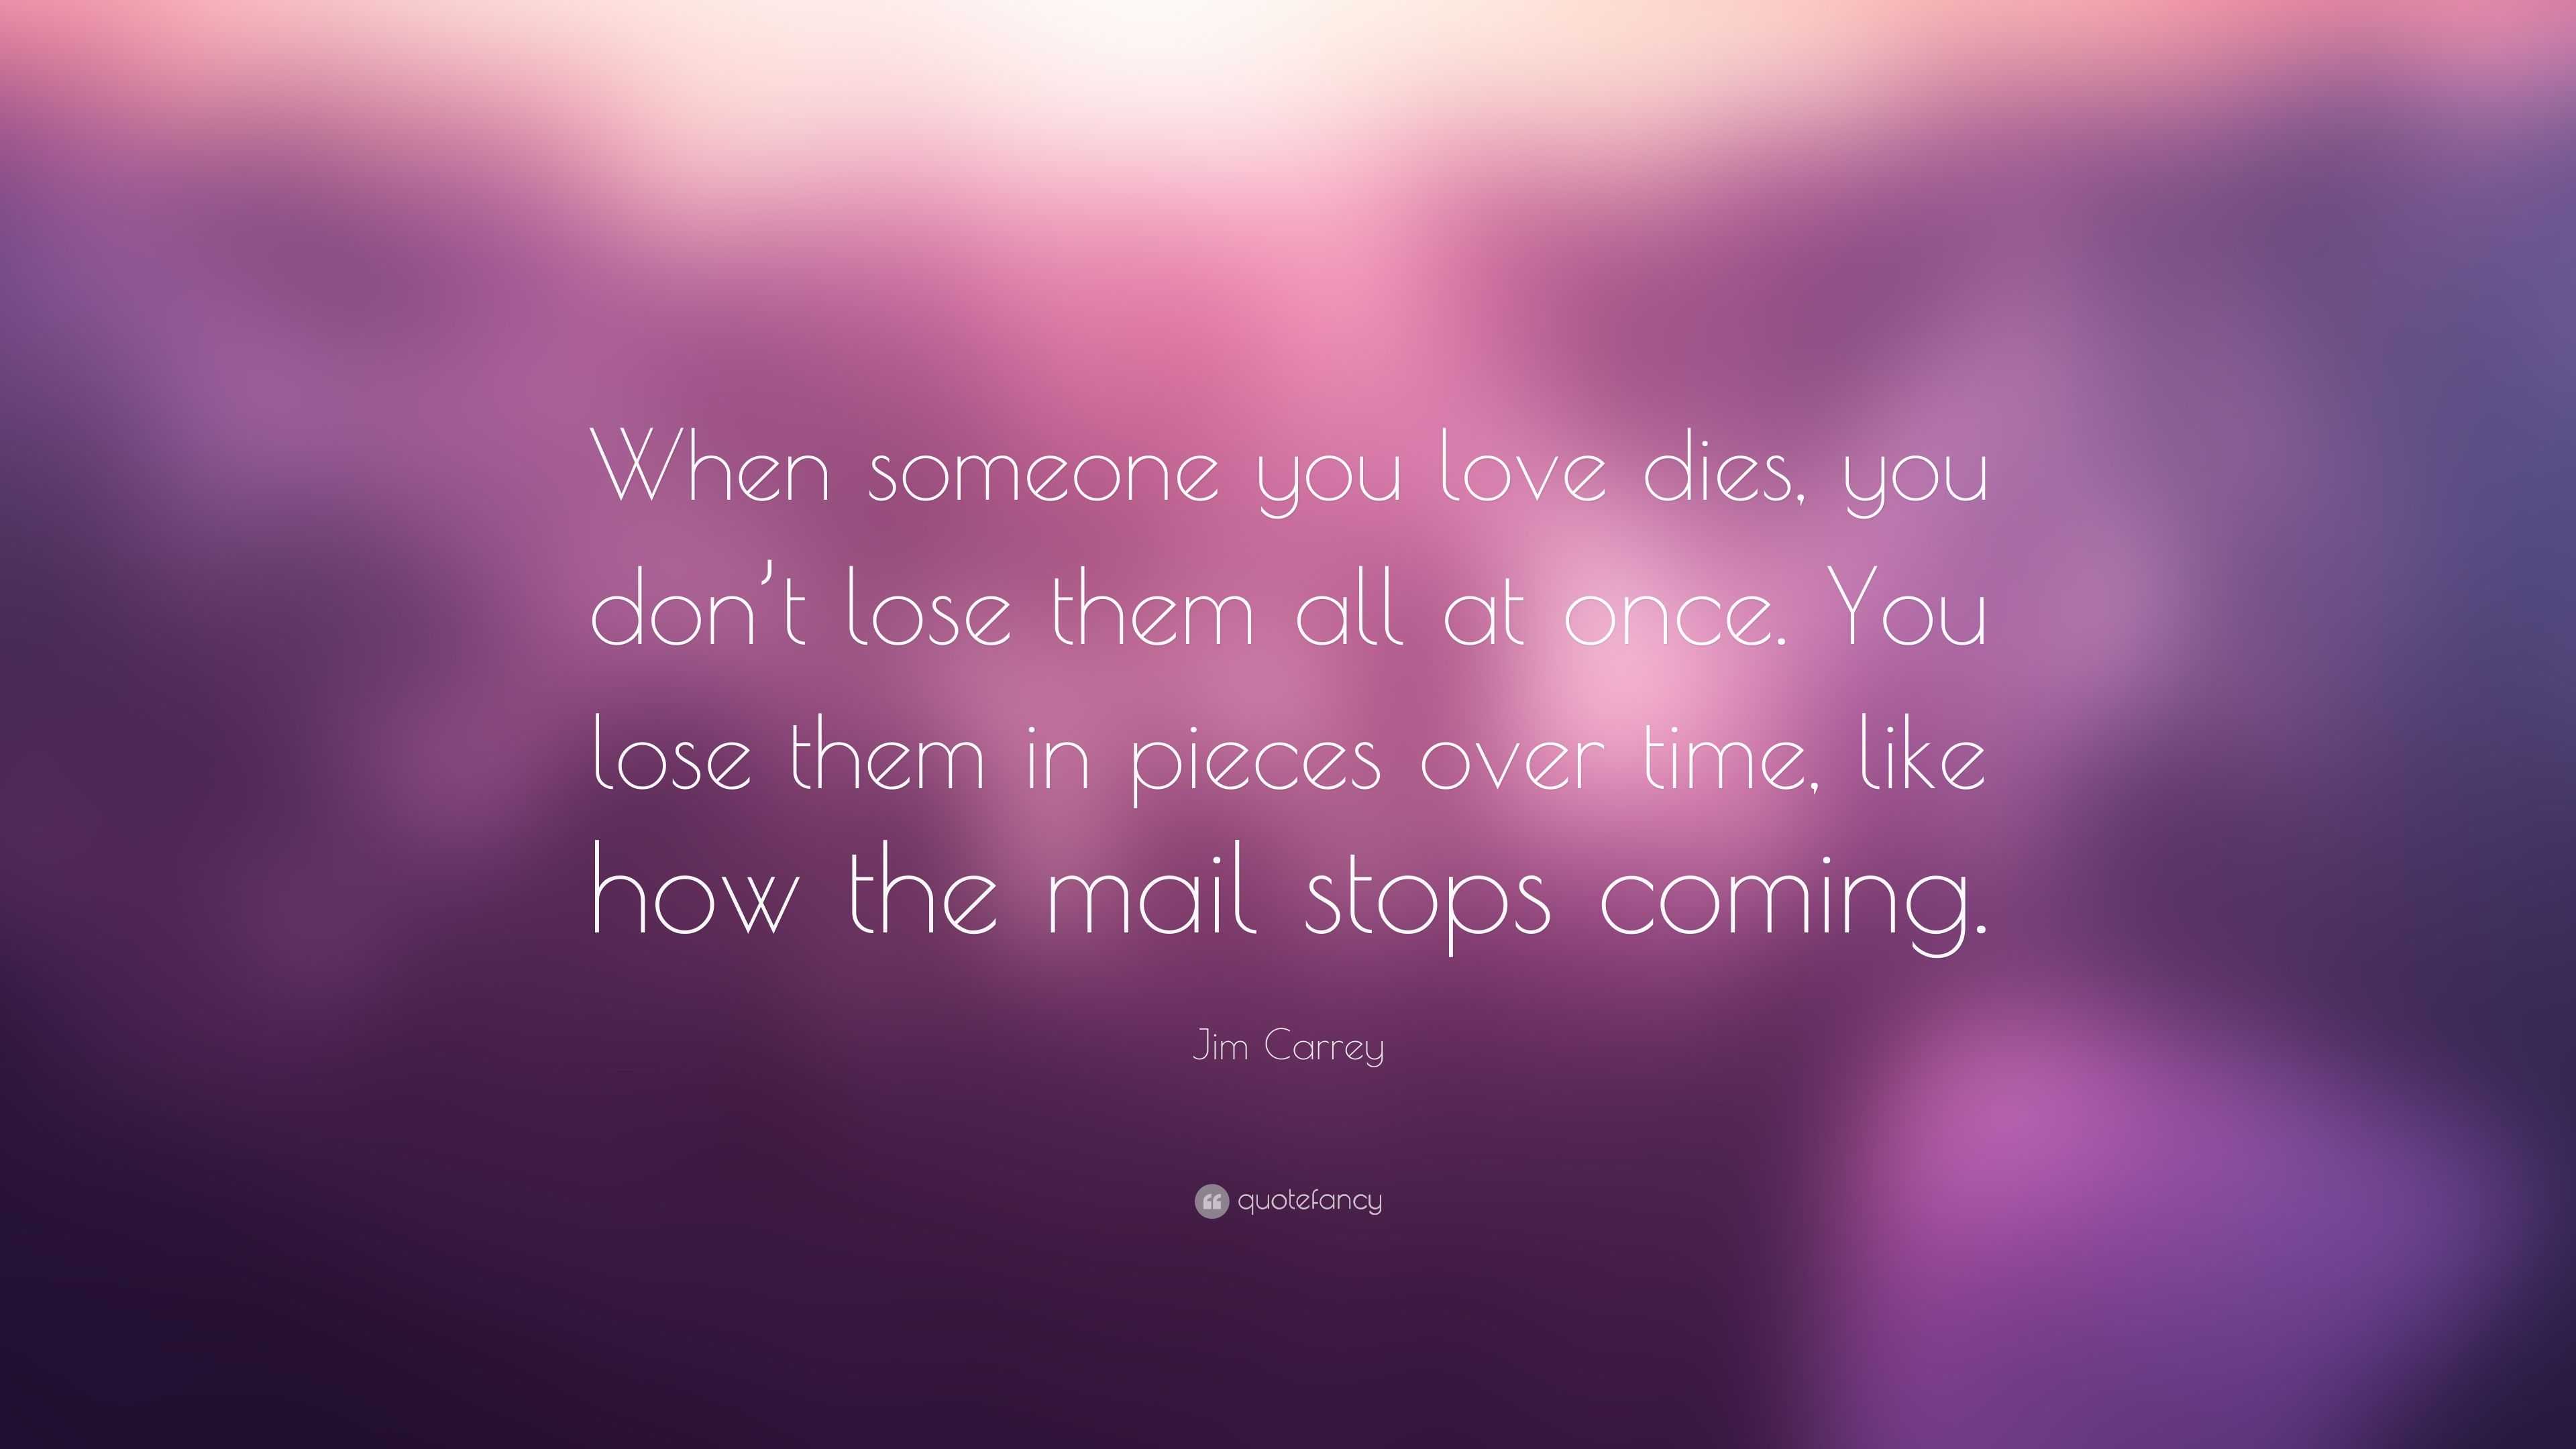 Jim Carrey Quote “When someone you love s you don t lose